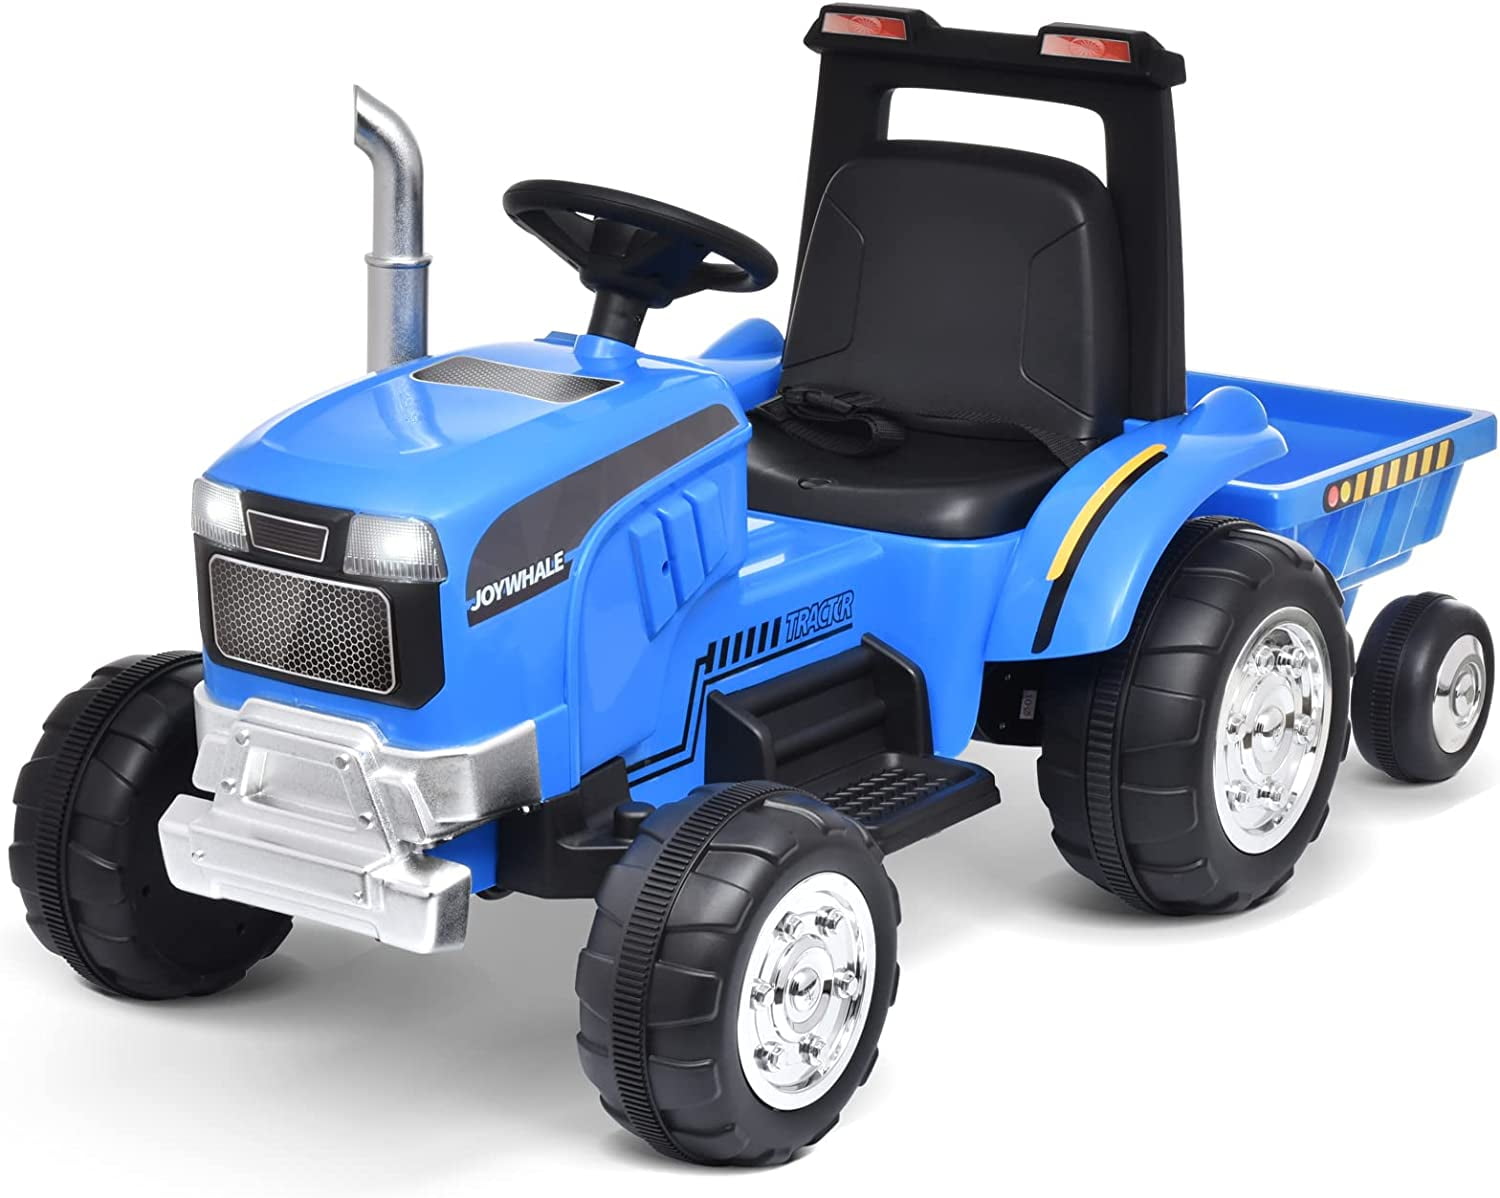 Joywhale 12V Kids Ride on Tractor Electric Excavator for Kids Ages 3-6